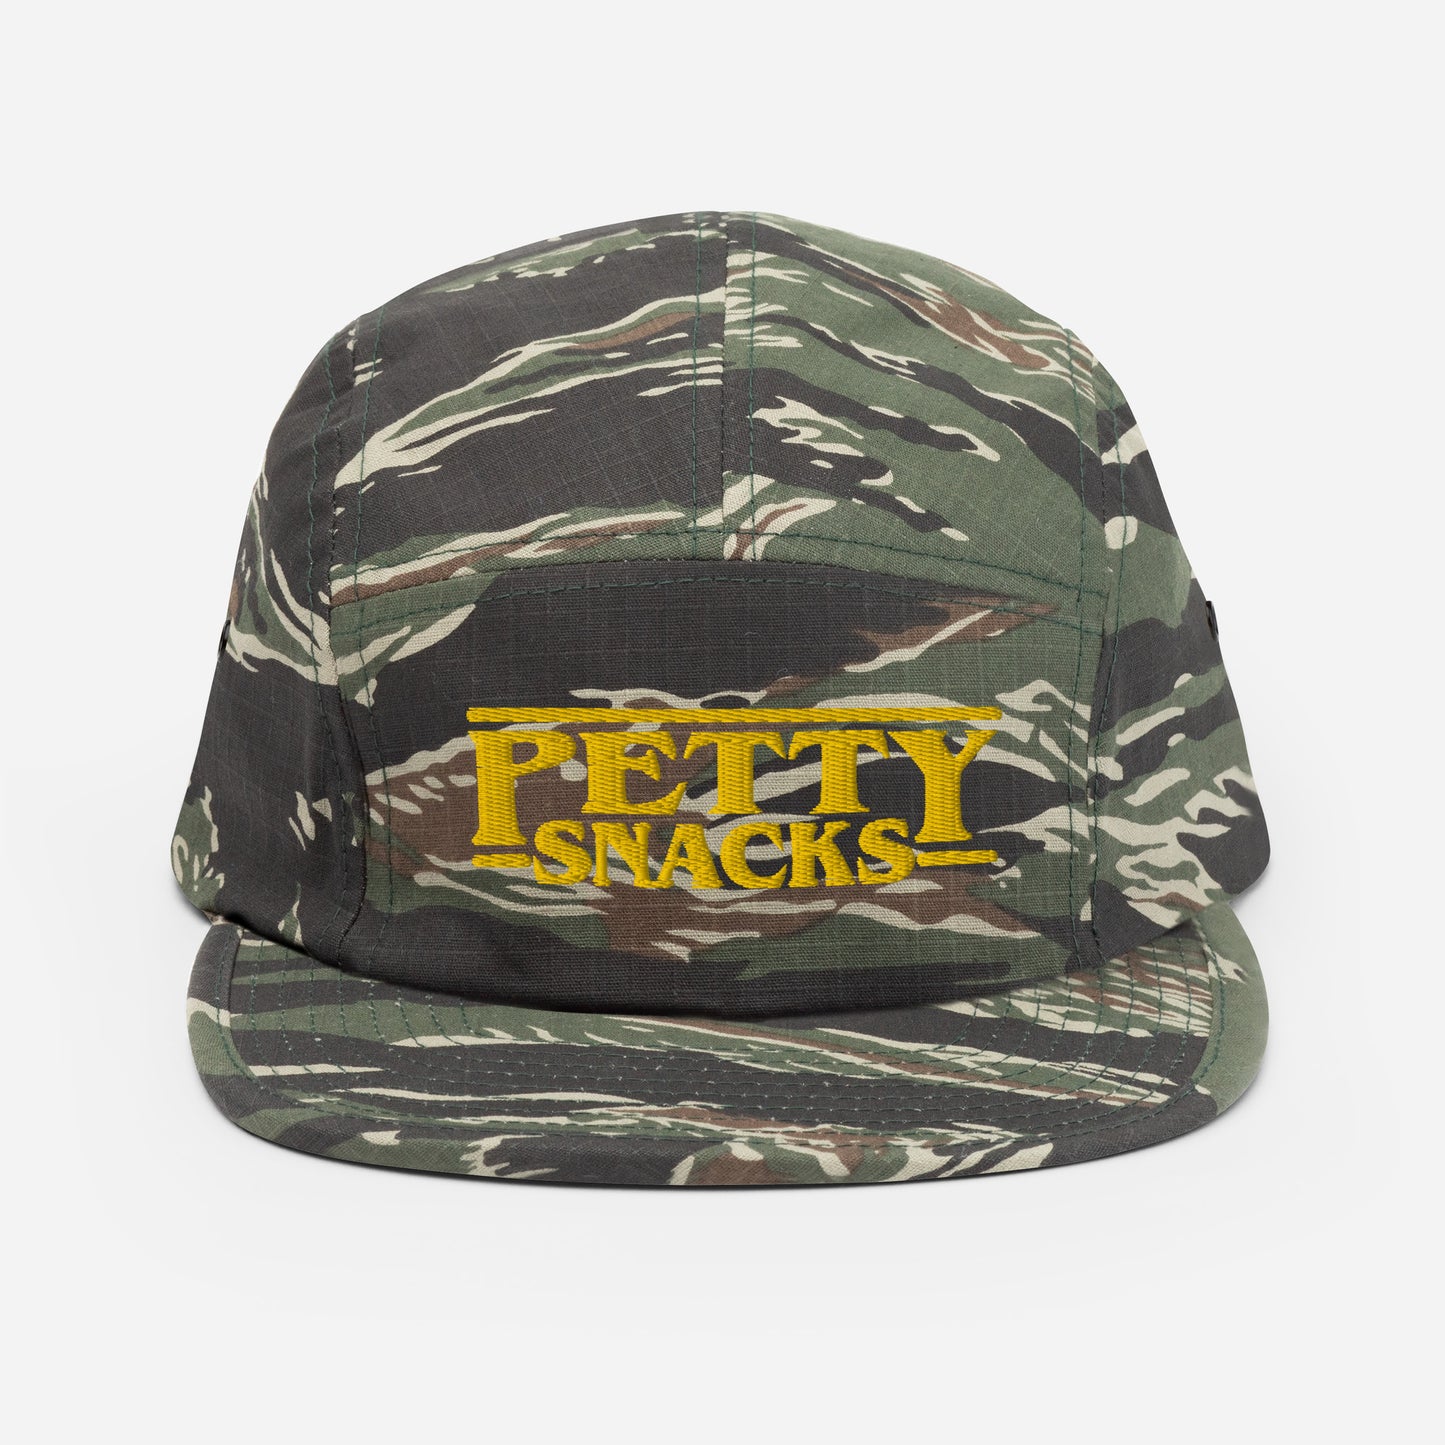 A green tiger-camo five-panel hat with embroidered lettering in front center. Letterings says "Petty Snacks" in yellow with a line on top and bottom of the words. In the style of film credits made famous by Tarantino.